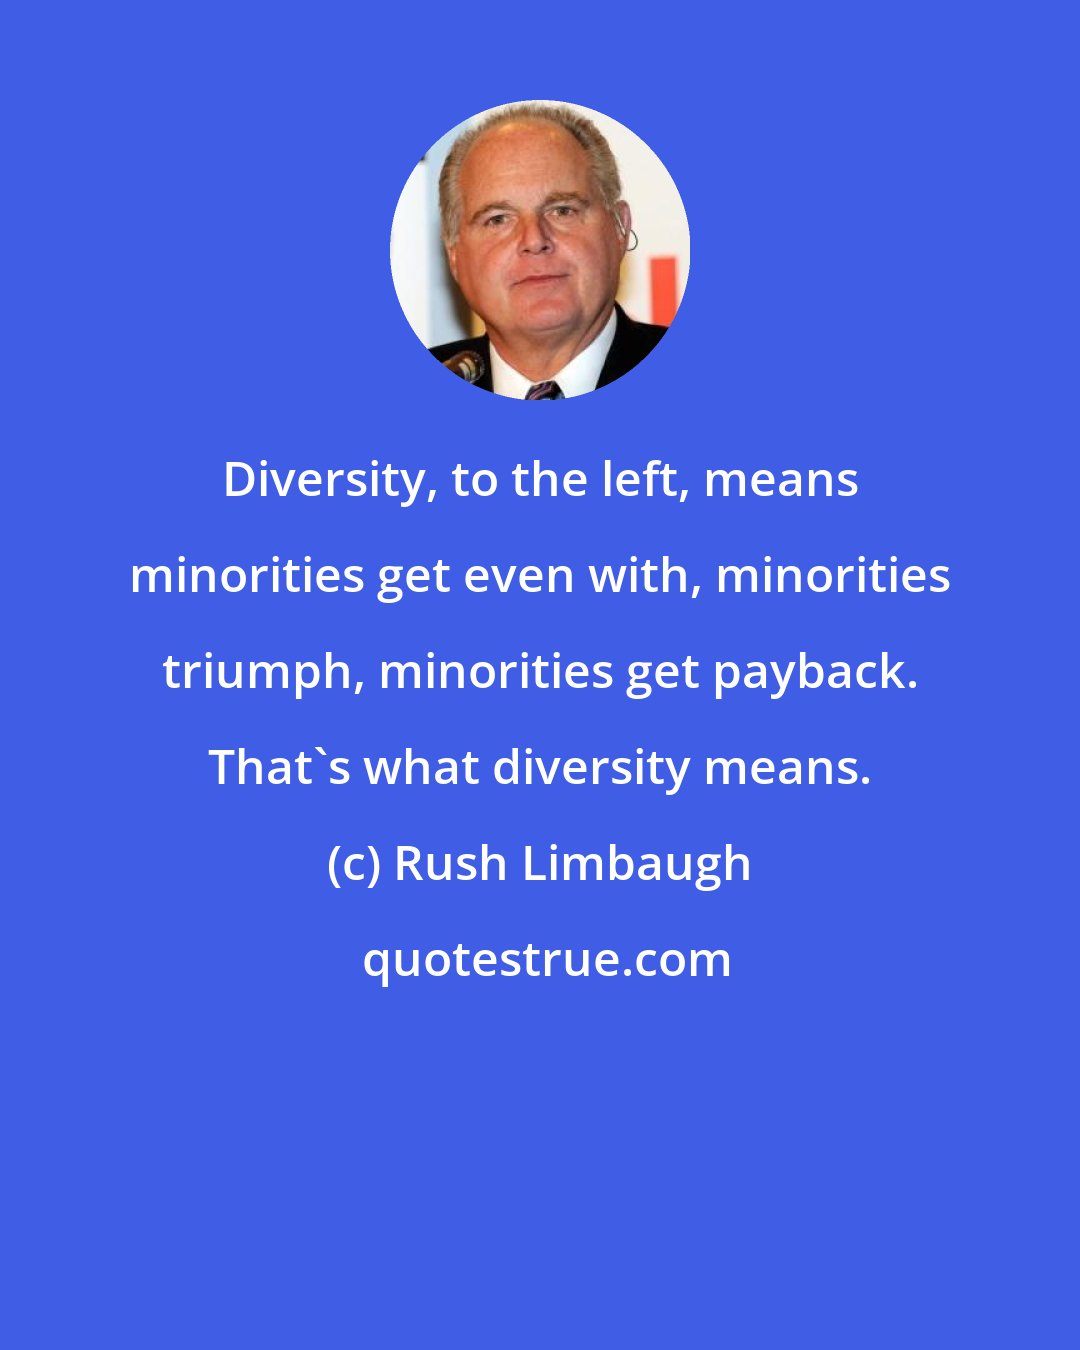 Rush Limbaugh: Diversity, to the left, means minorities get even with, minorities triumph, minorities get payback. That's what diversity means.